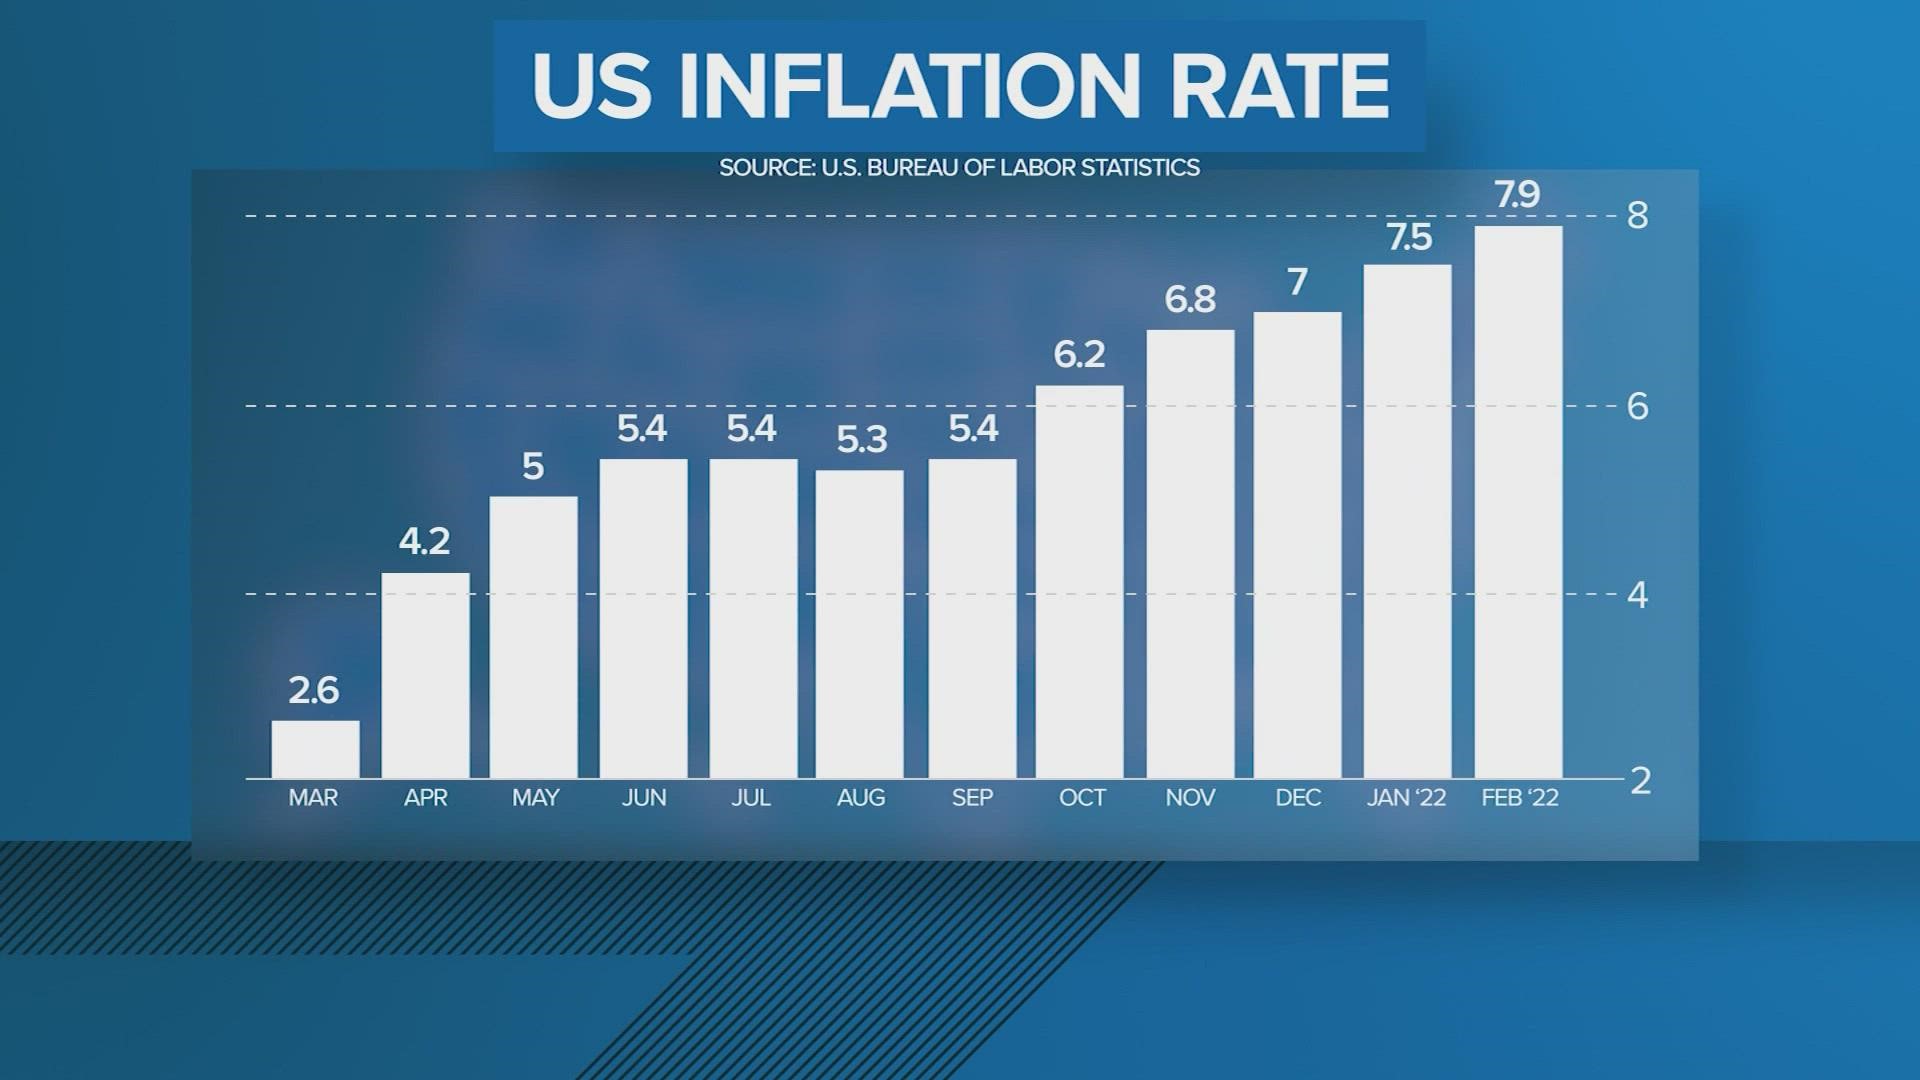 Since last year, the inflation rate in the United States has steadily gone up -- from a low of 2.6% in March 2021 to a 40-year high of 7.9% last month.